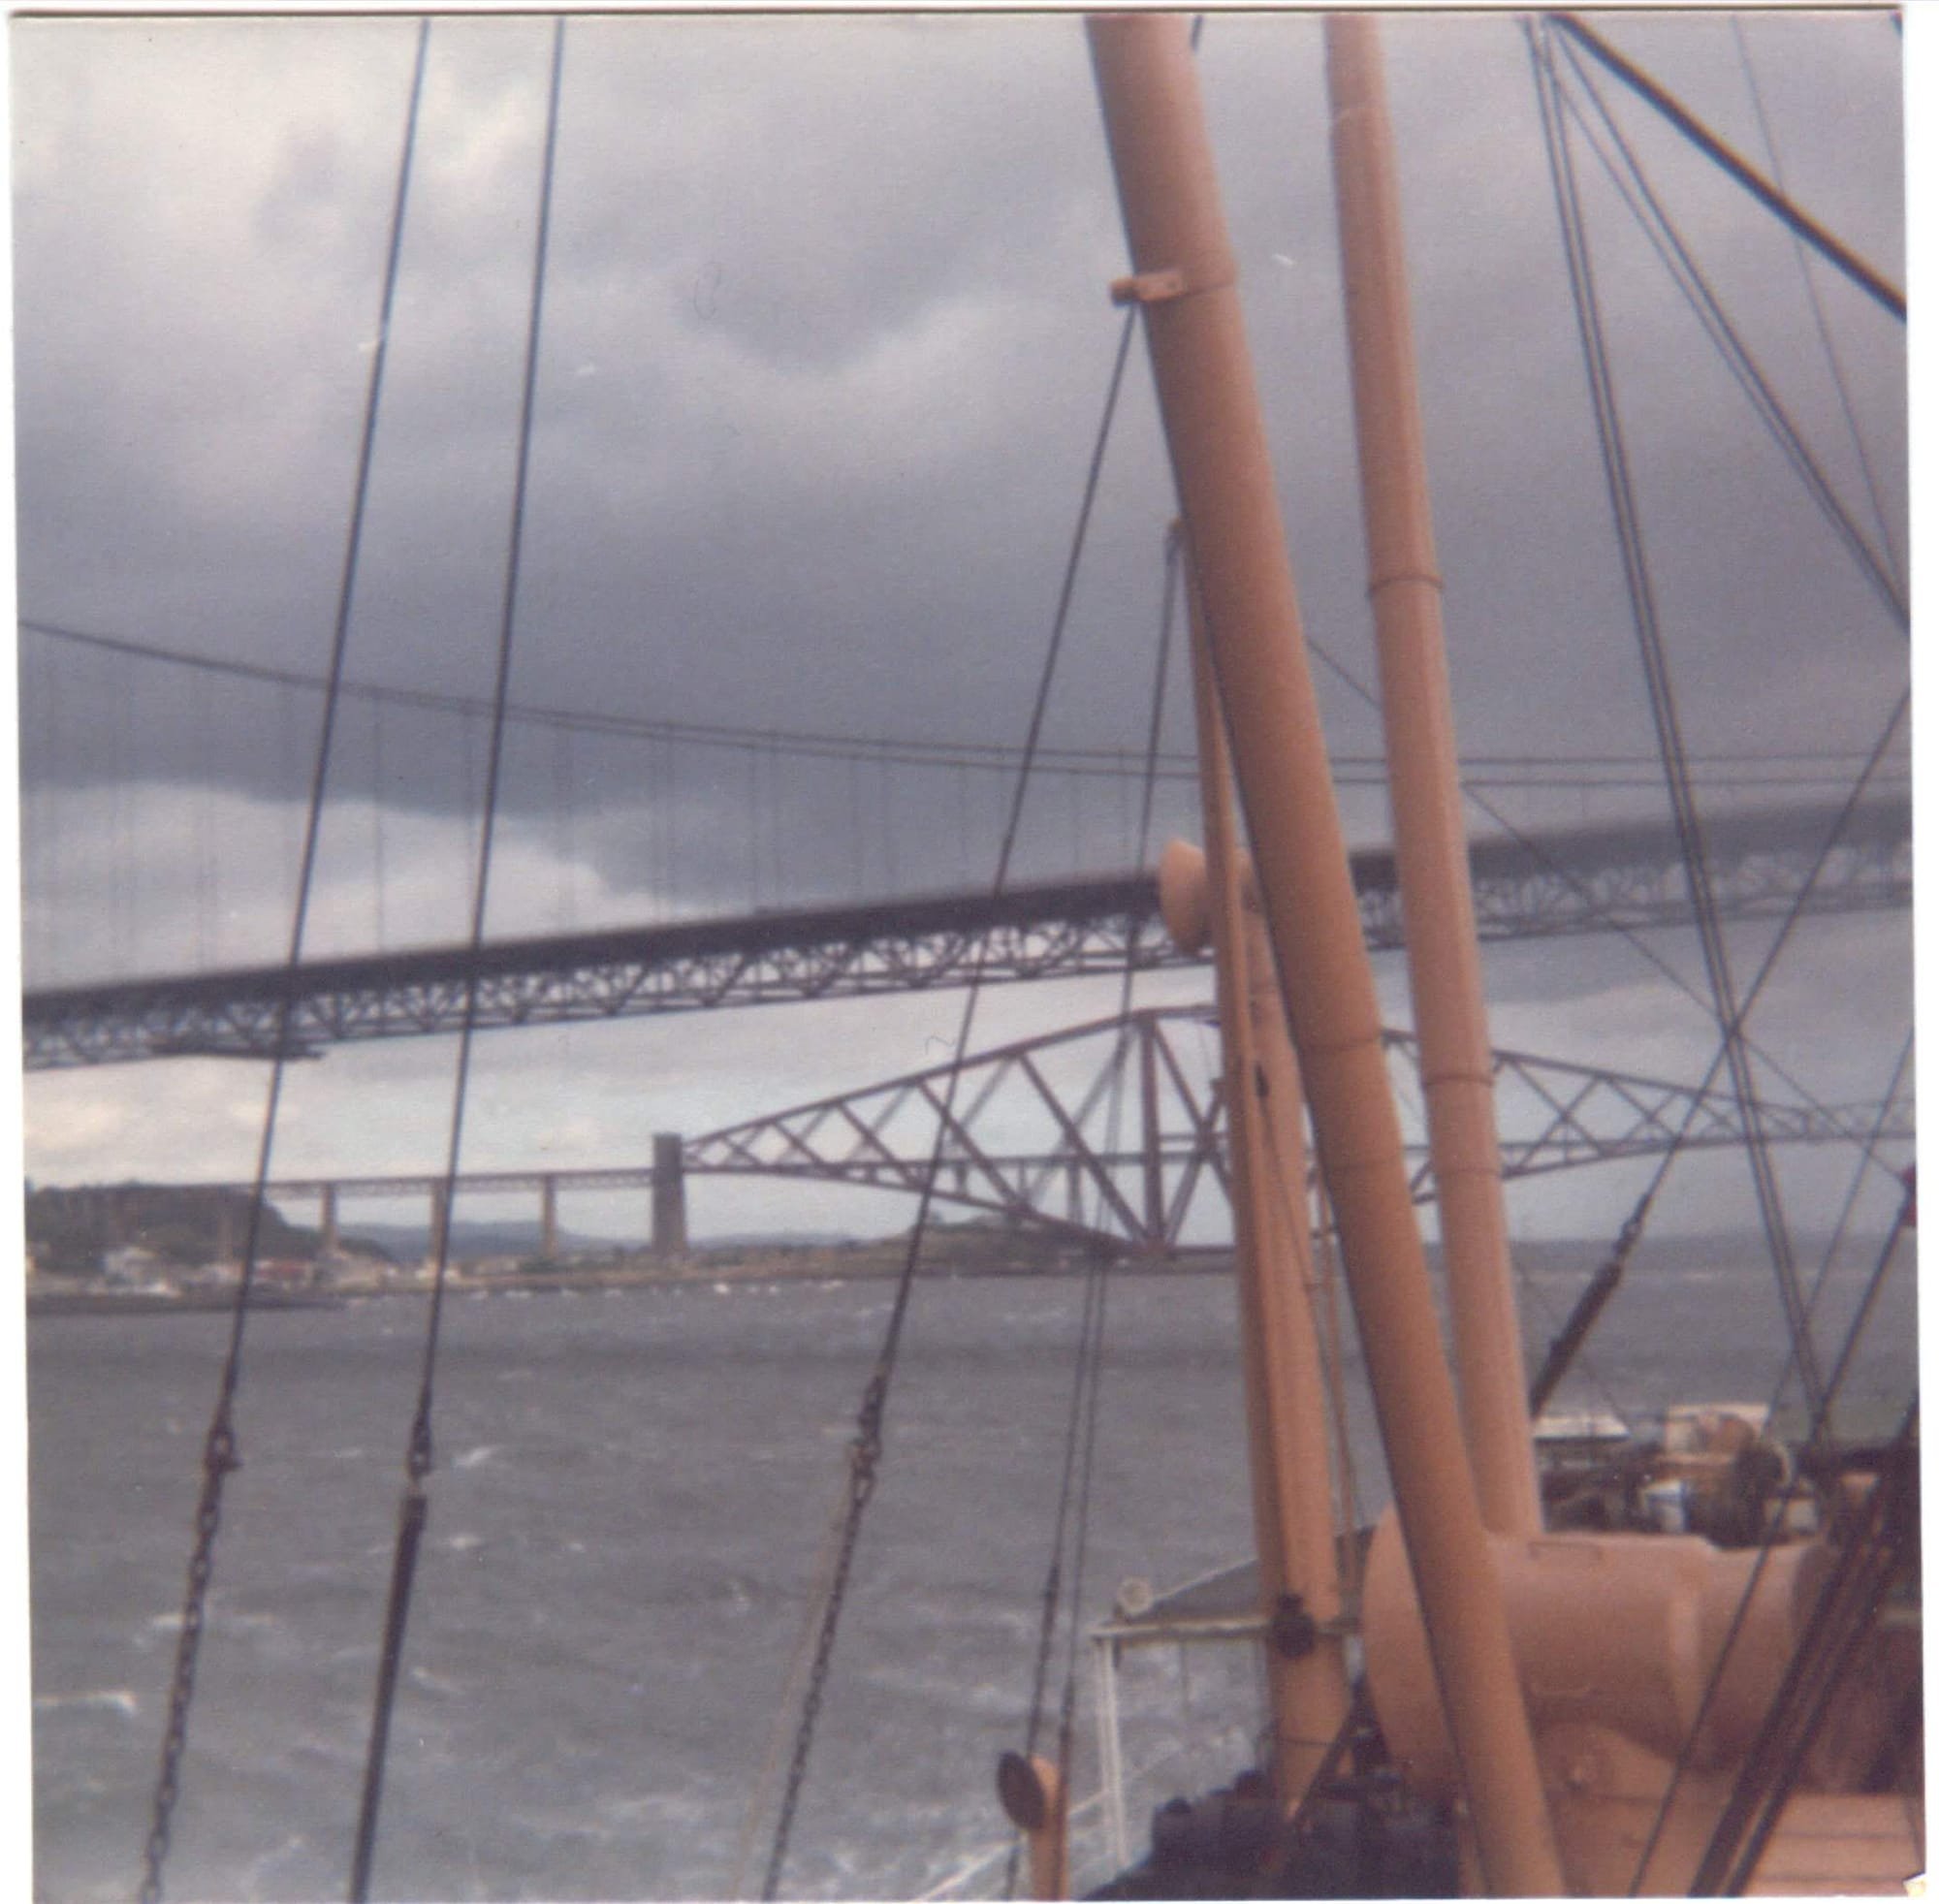 Forth Rail Bridge and why welfare was introduced